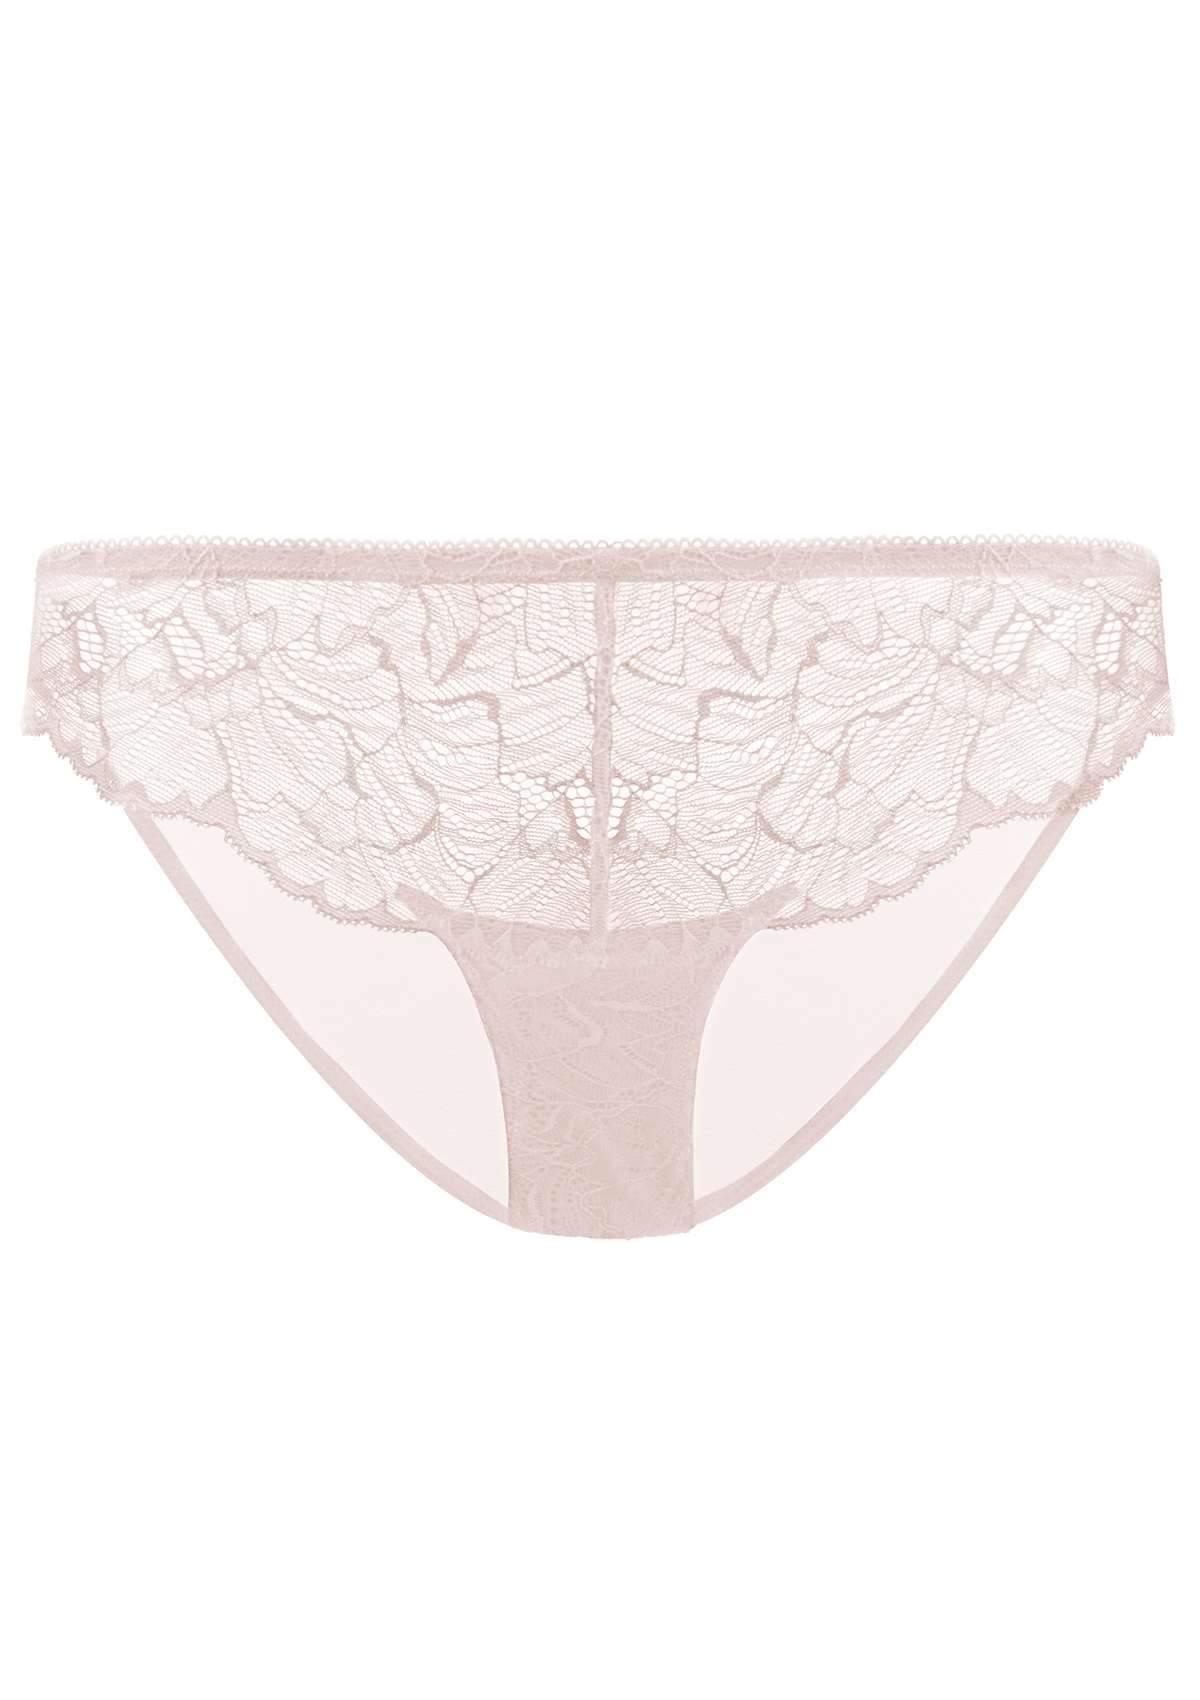 HSIA Blossom Mid-Rise Front Lace Mesh Back Everyday Pantie  - XXL / Dark Pink / High-Rise Brief